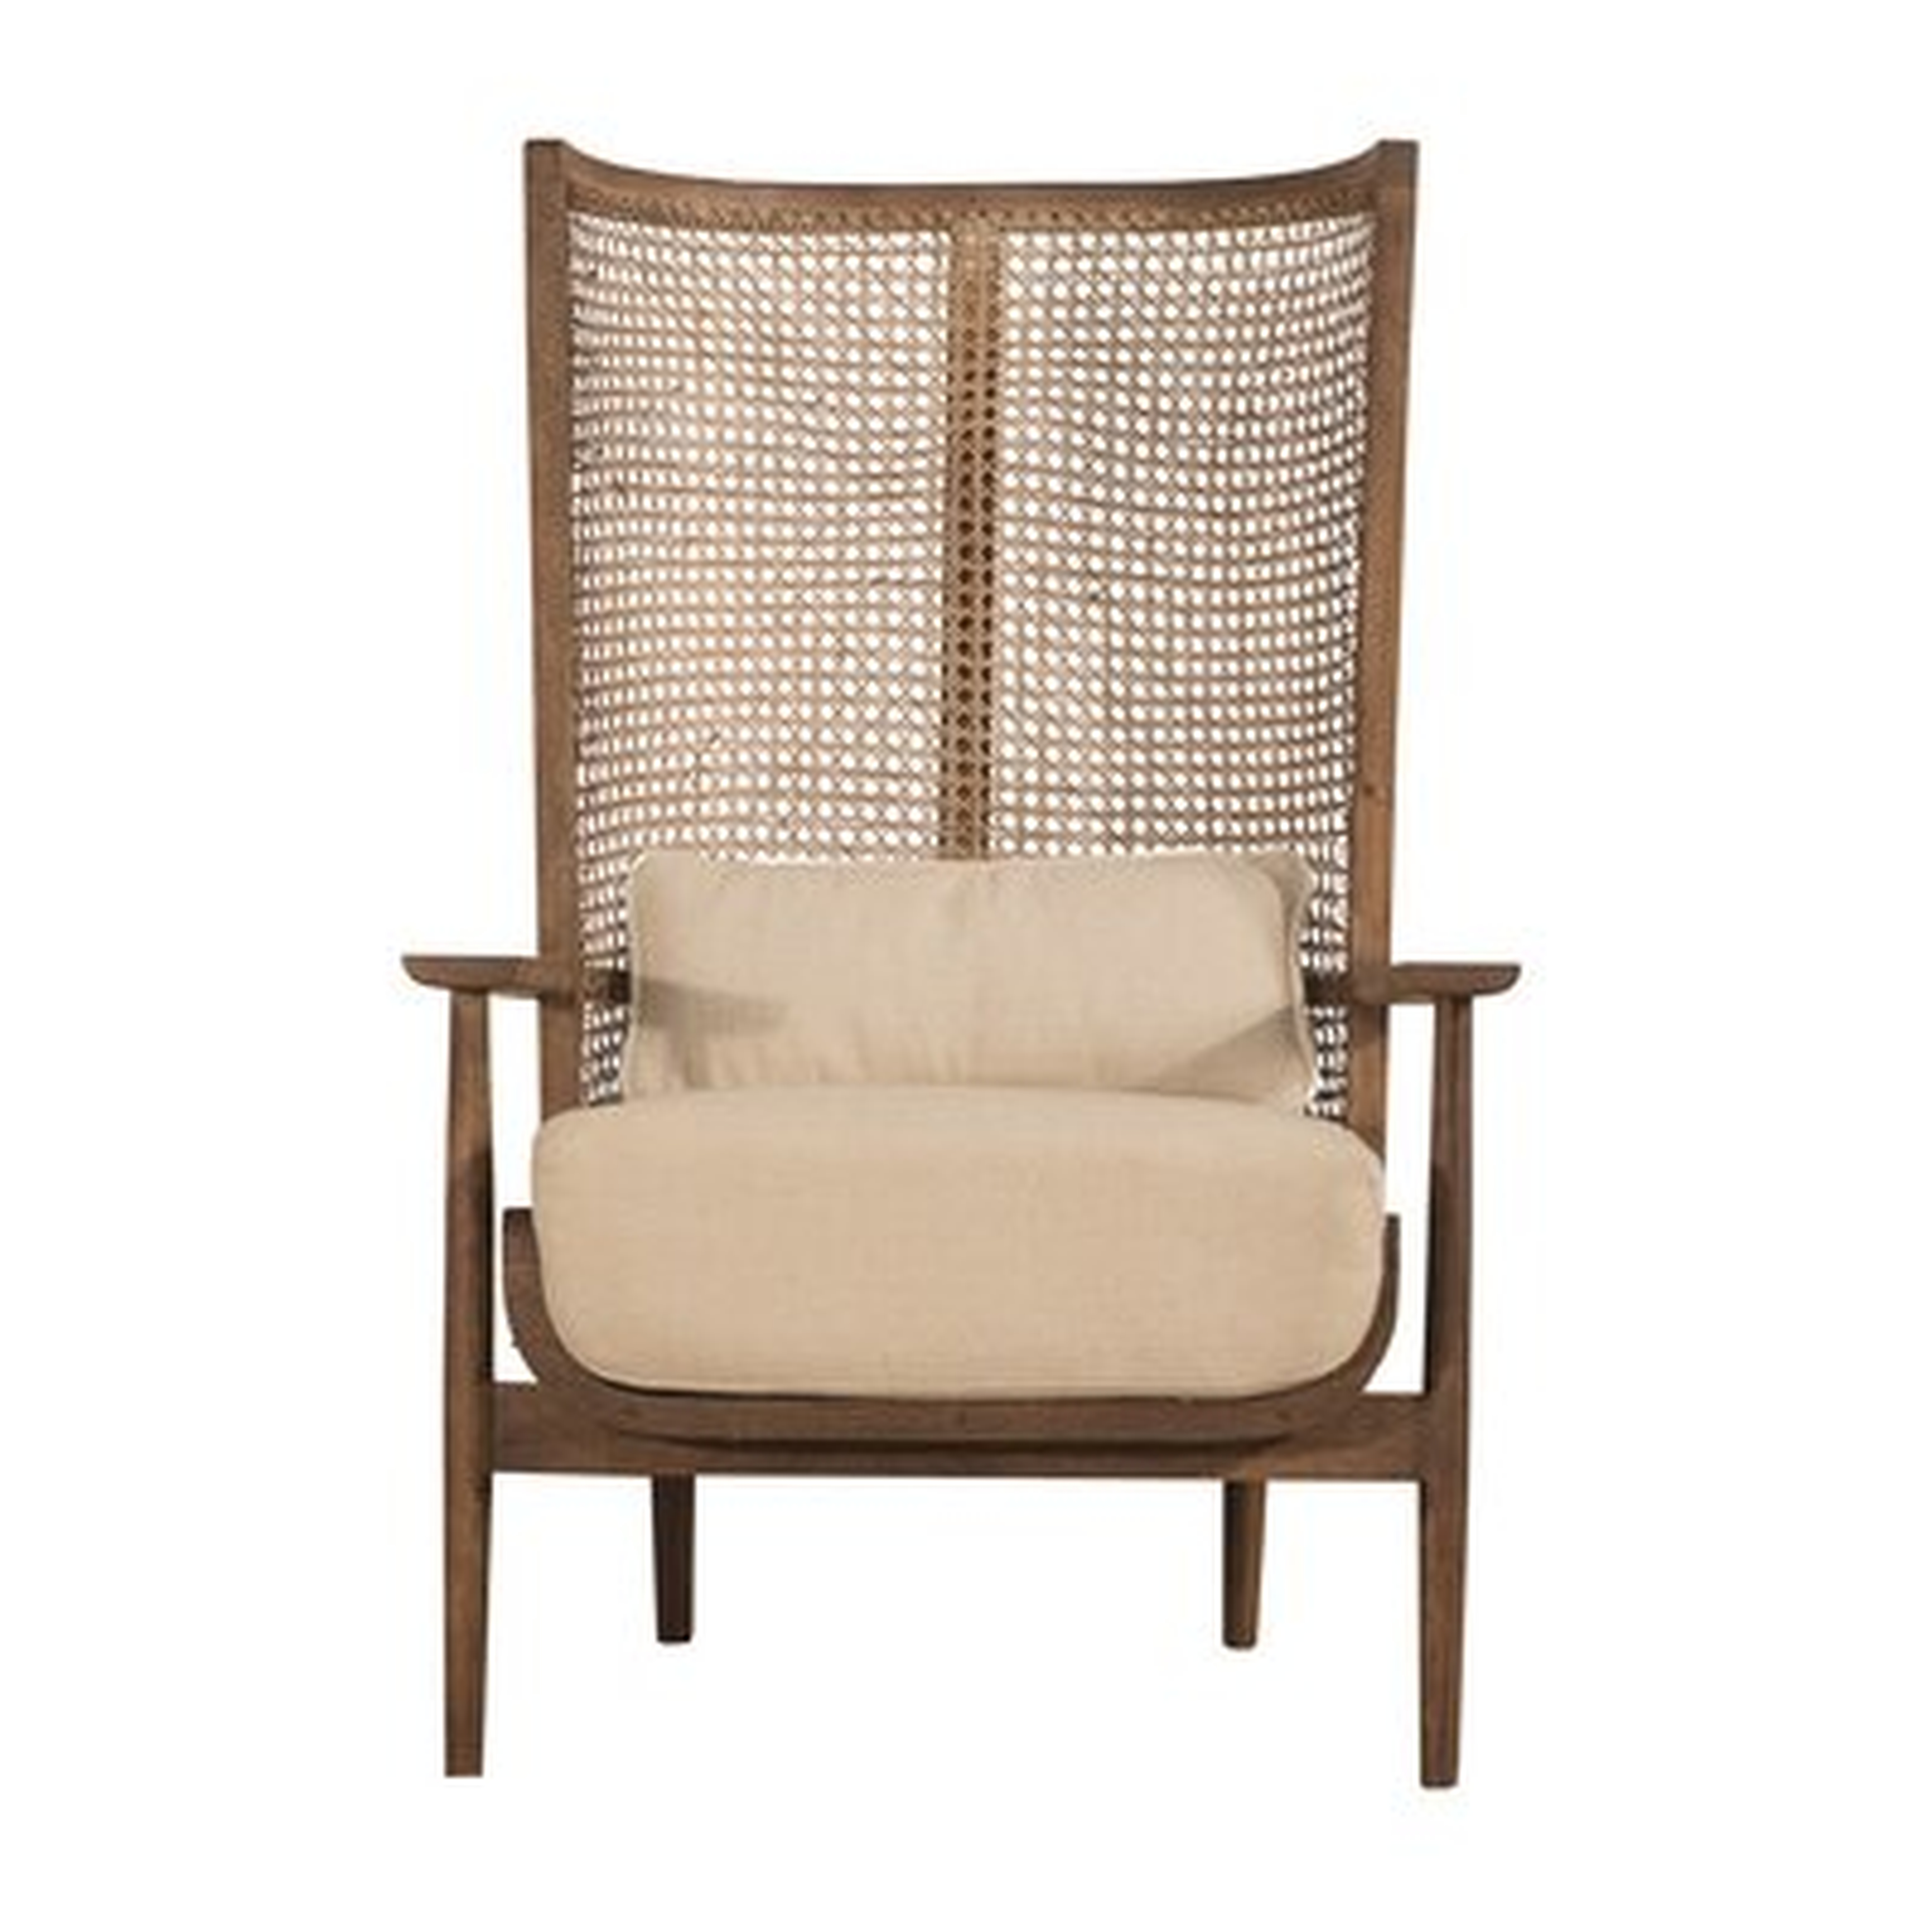 Yeager Lounge Chair - Wayfair